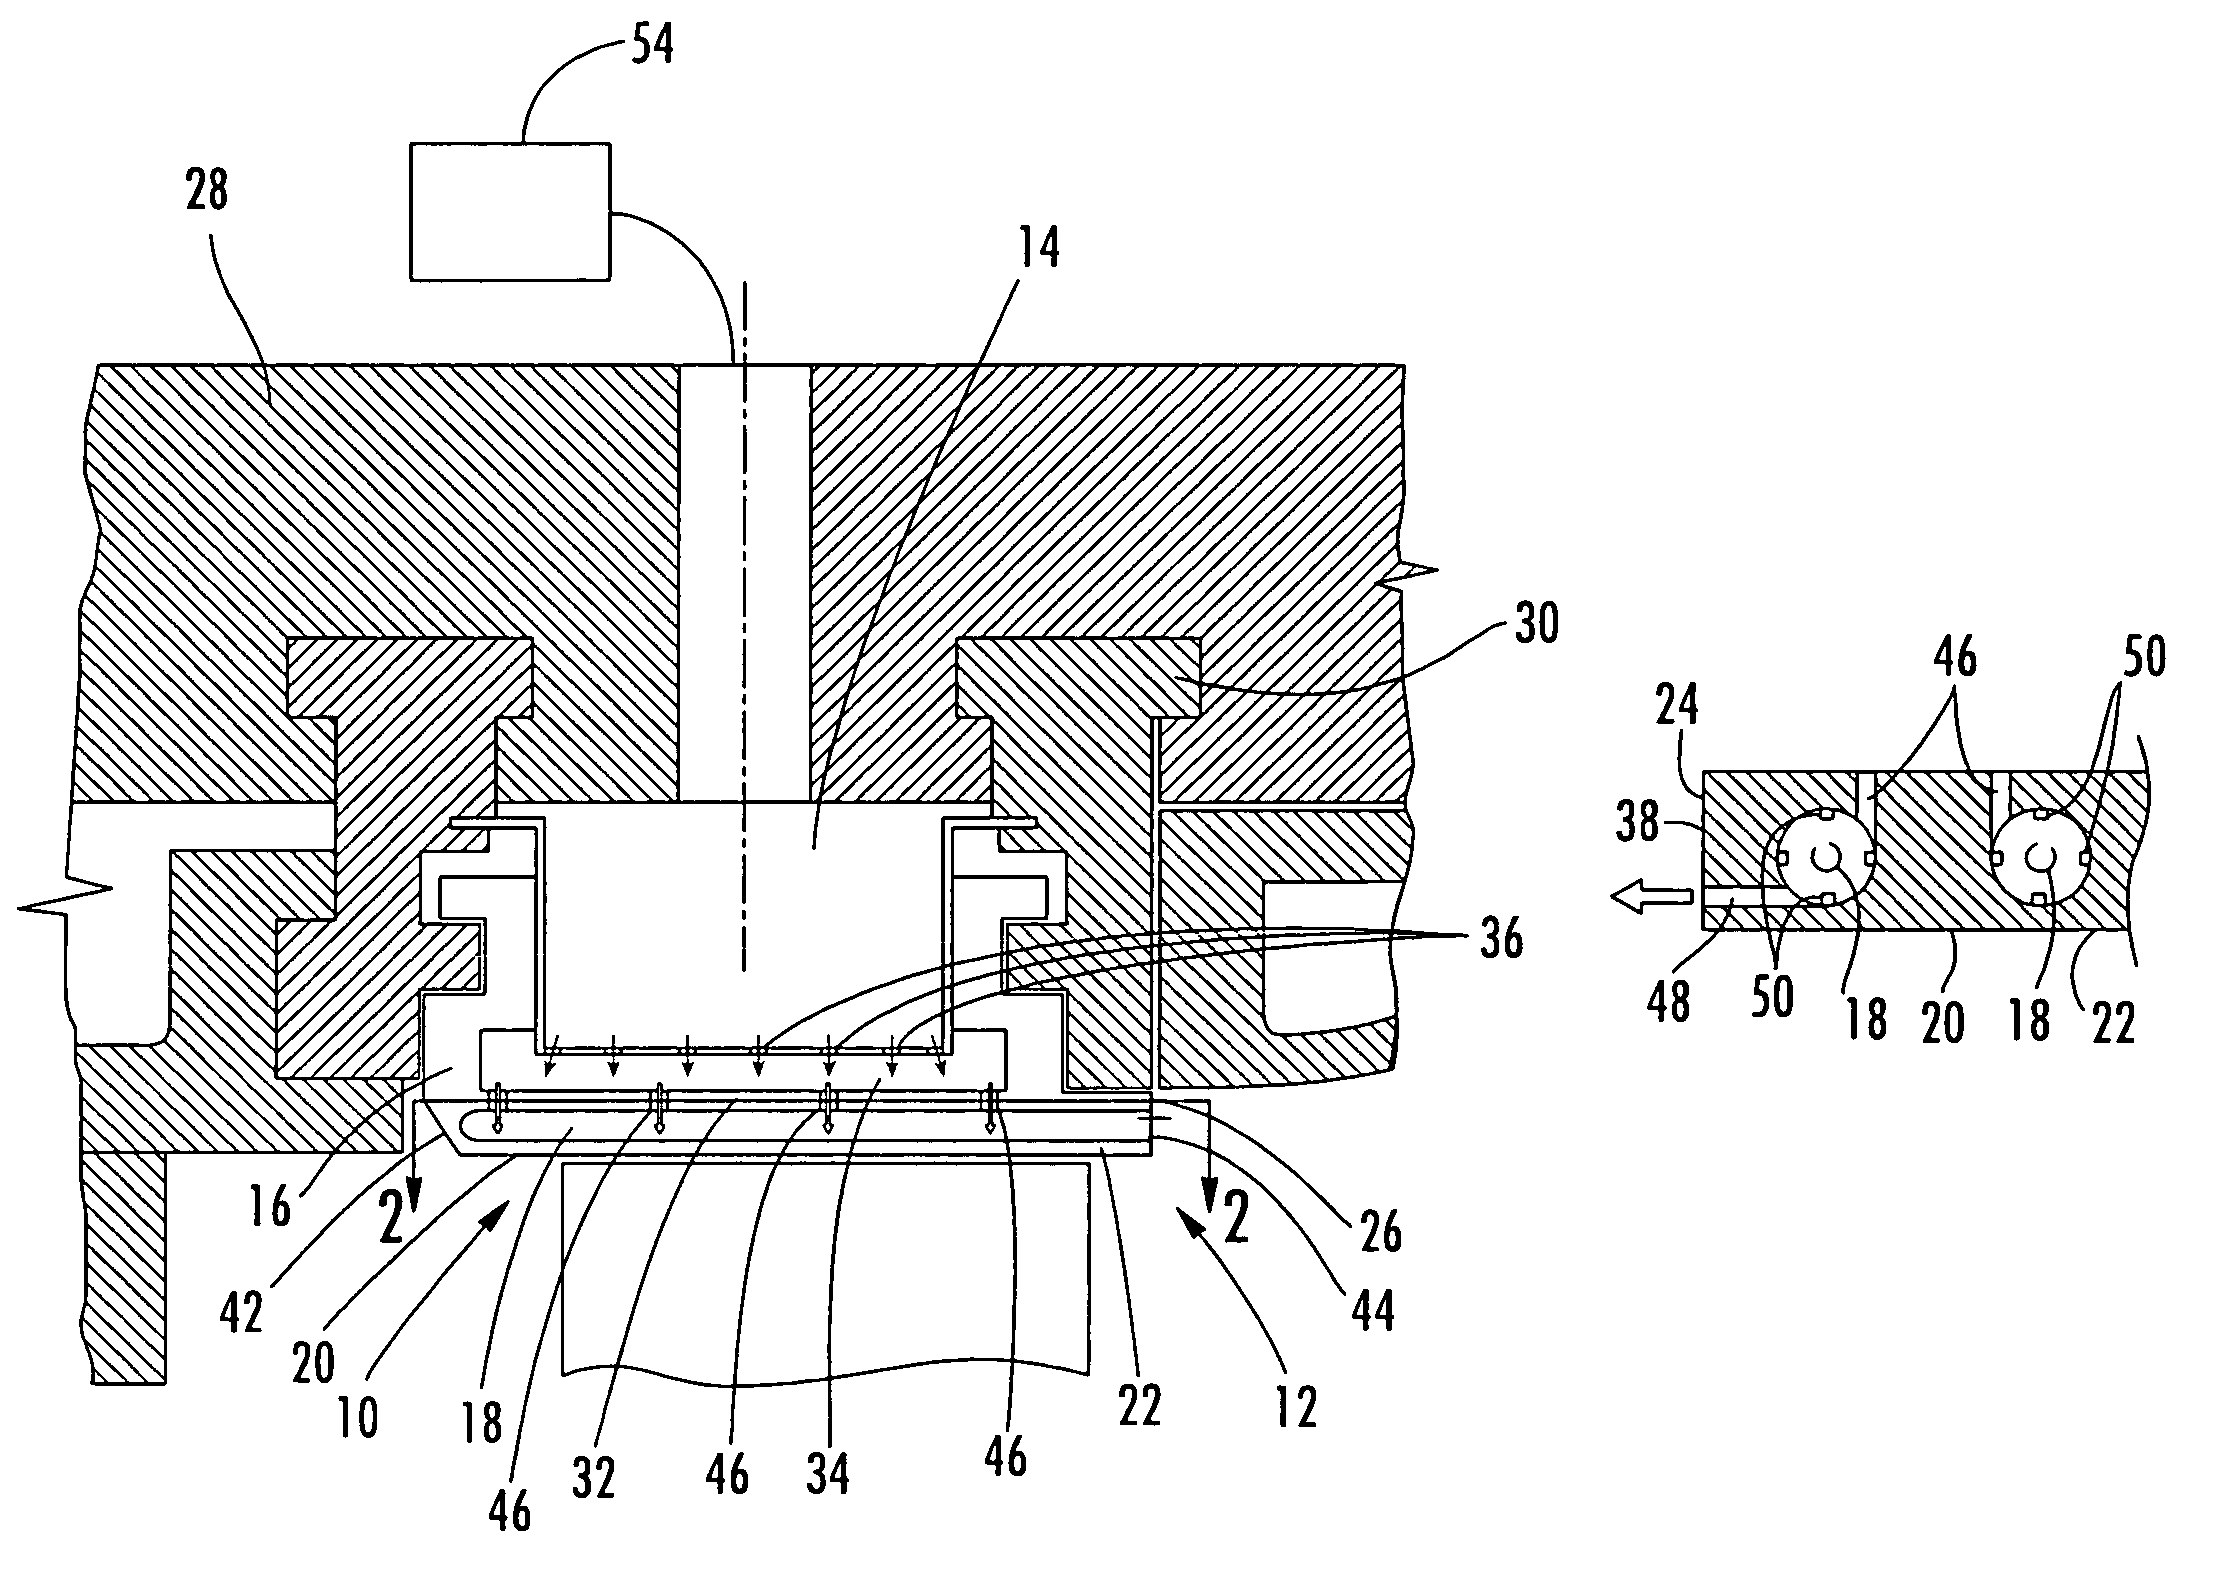 Vortex cooled turbine blade outer air seal for a turbine engine